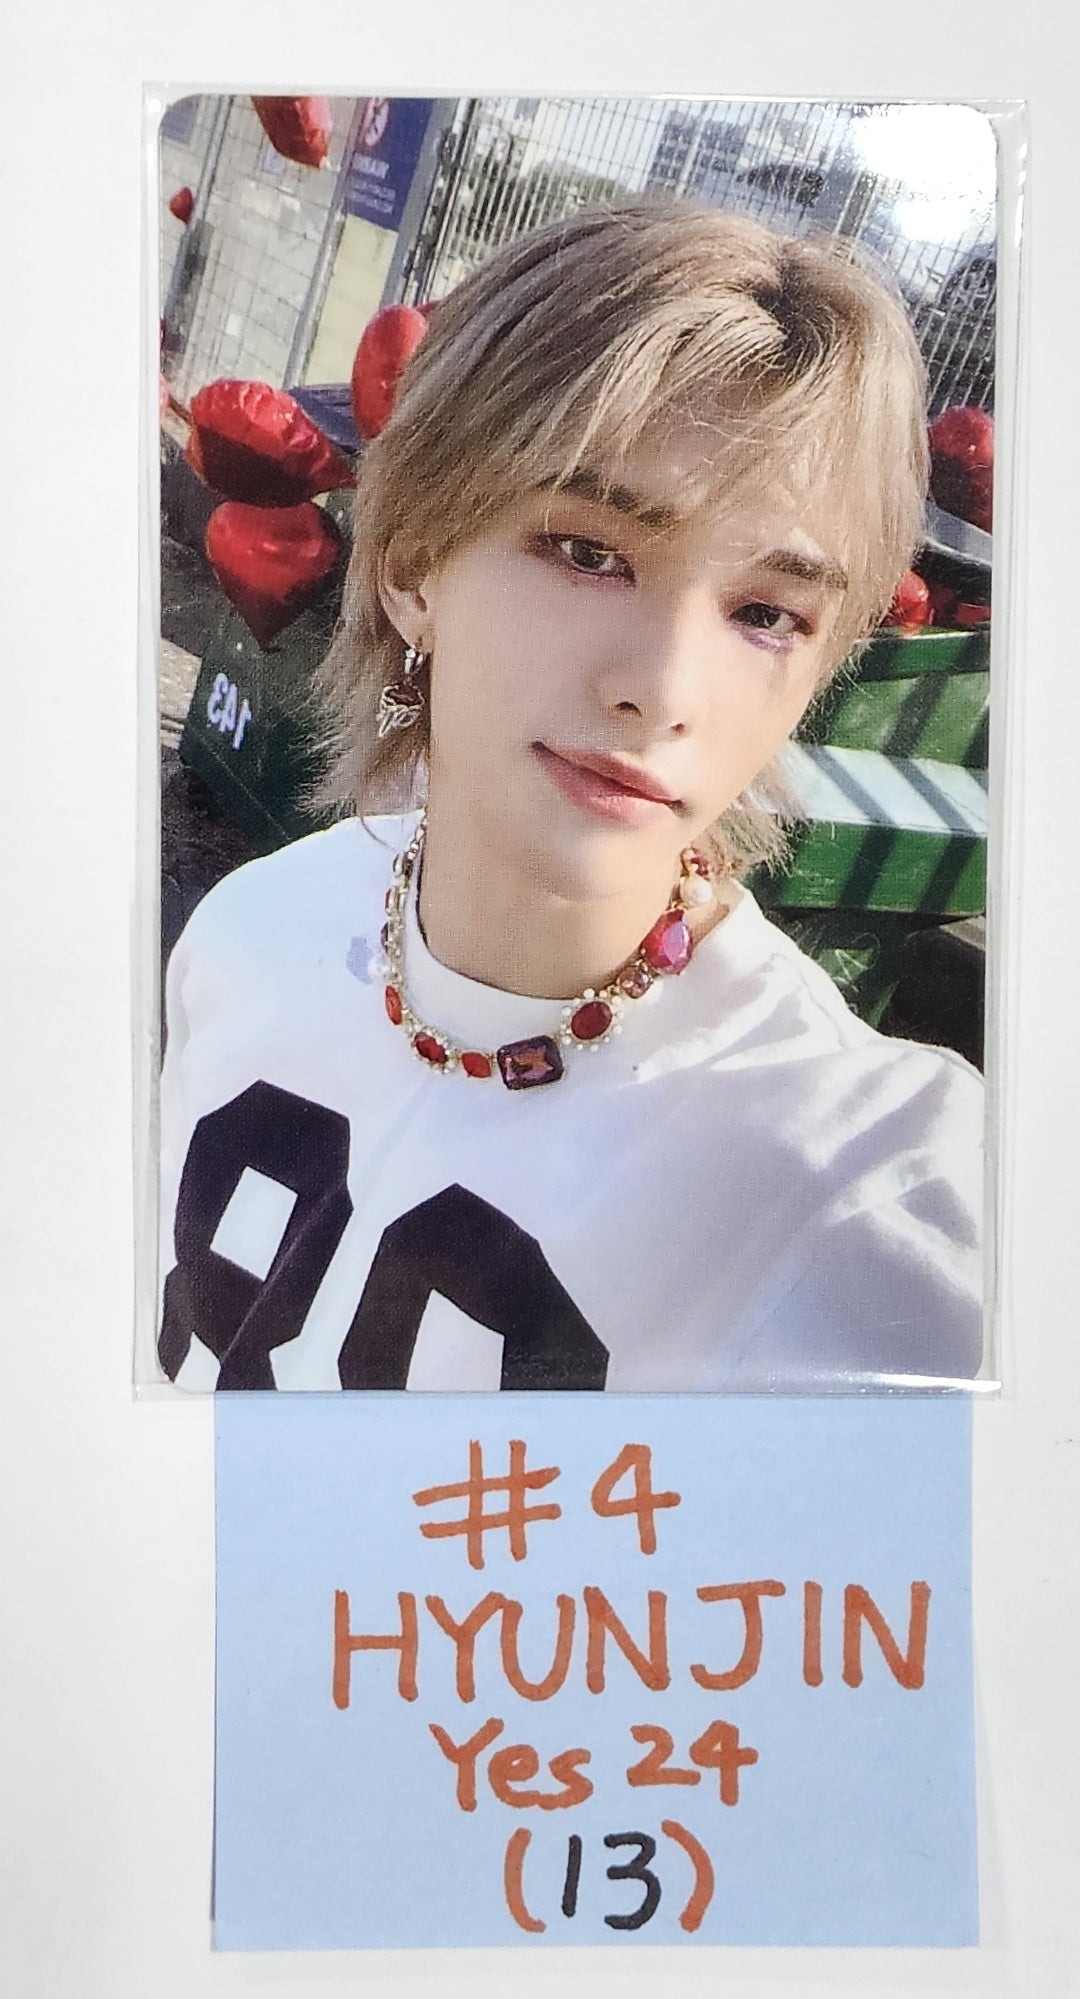 Stray Kids “MAXIDENT” - Yes24 Pre-Order Benefit Photocard